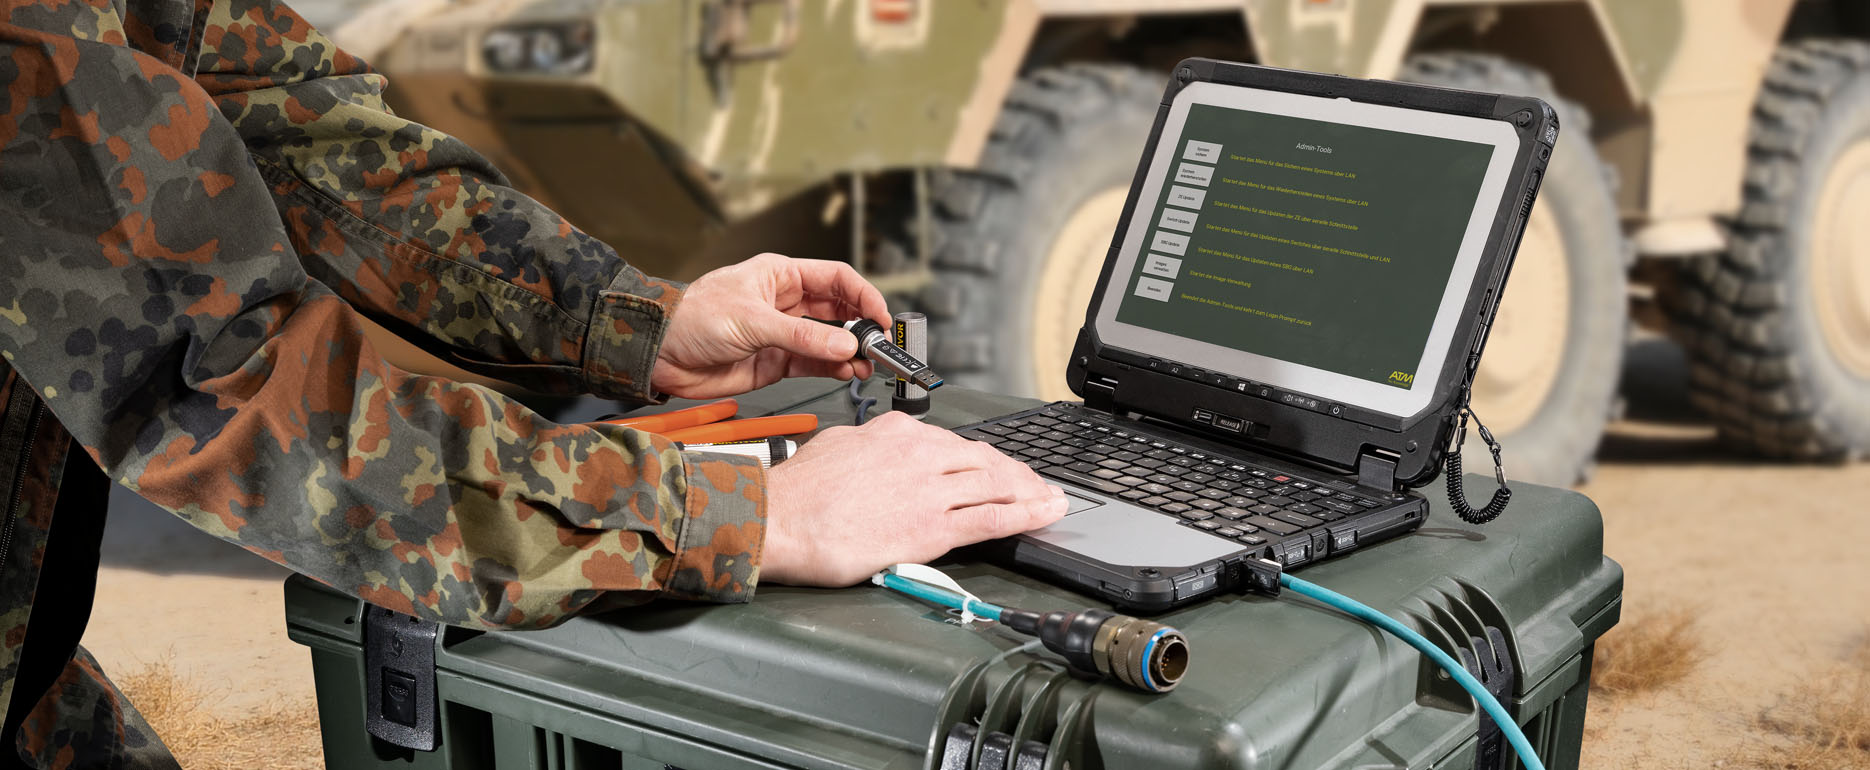 Soldier inserting a USB stick into a laptop